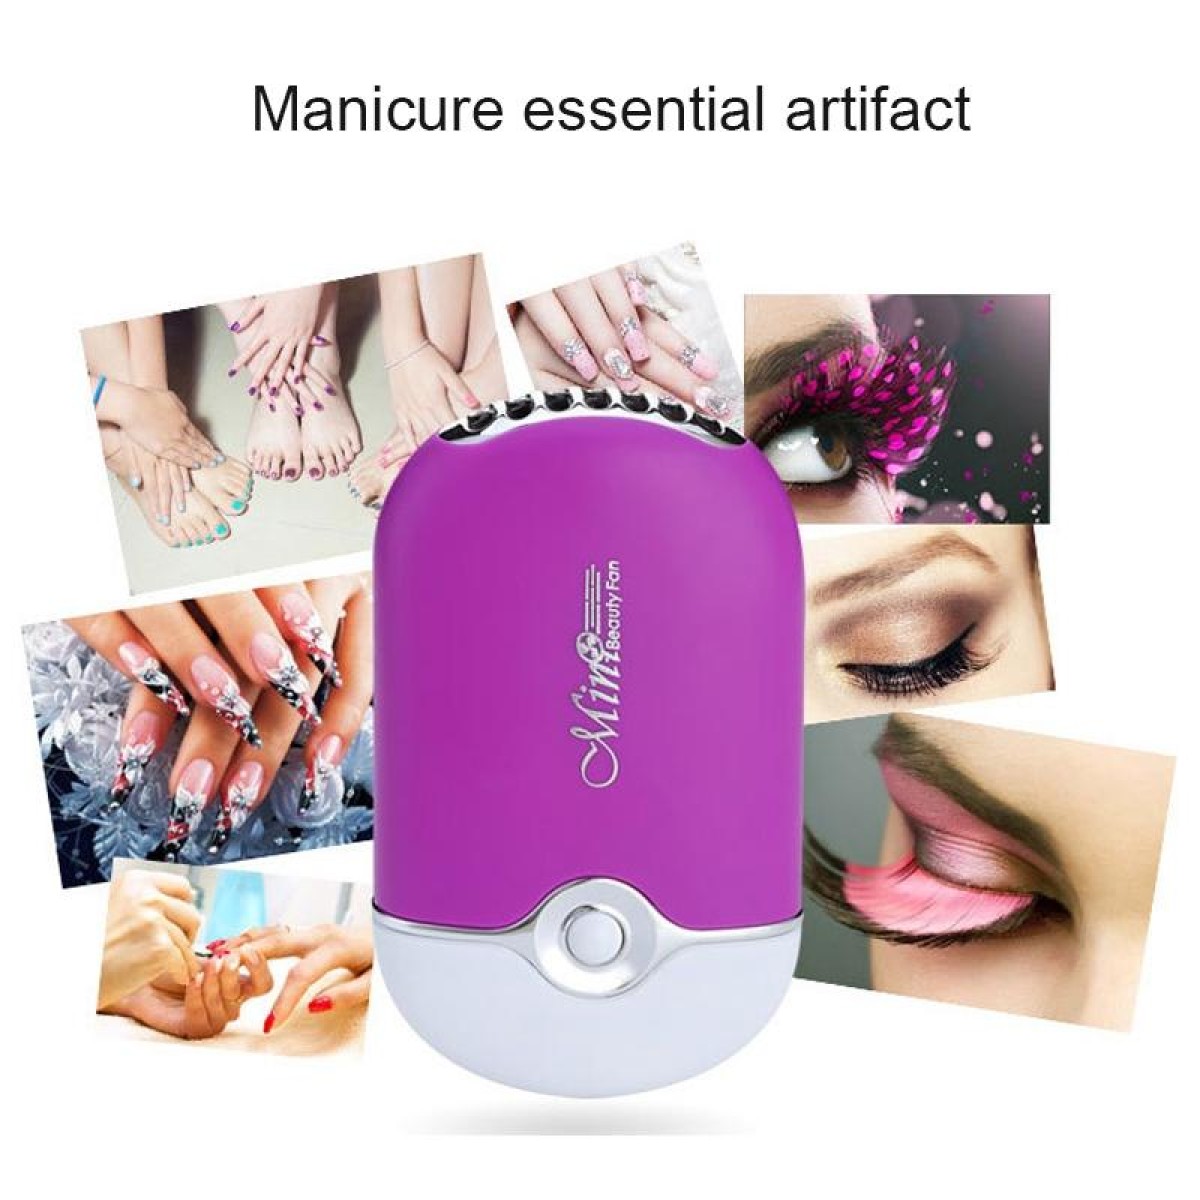 Portable Handheld Mini Pocket USB Air Conditioning Cooling Fan Grafted Eyelashes Dryer(Pink)